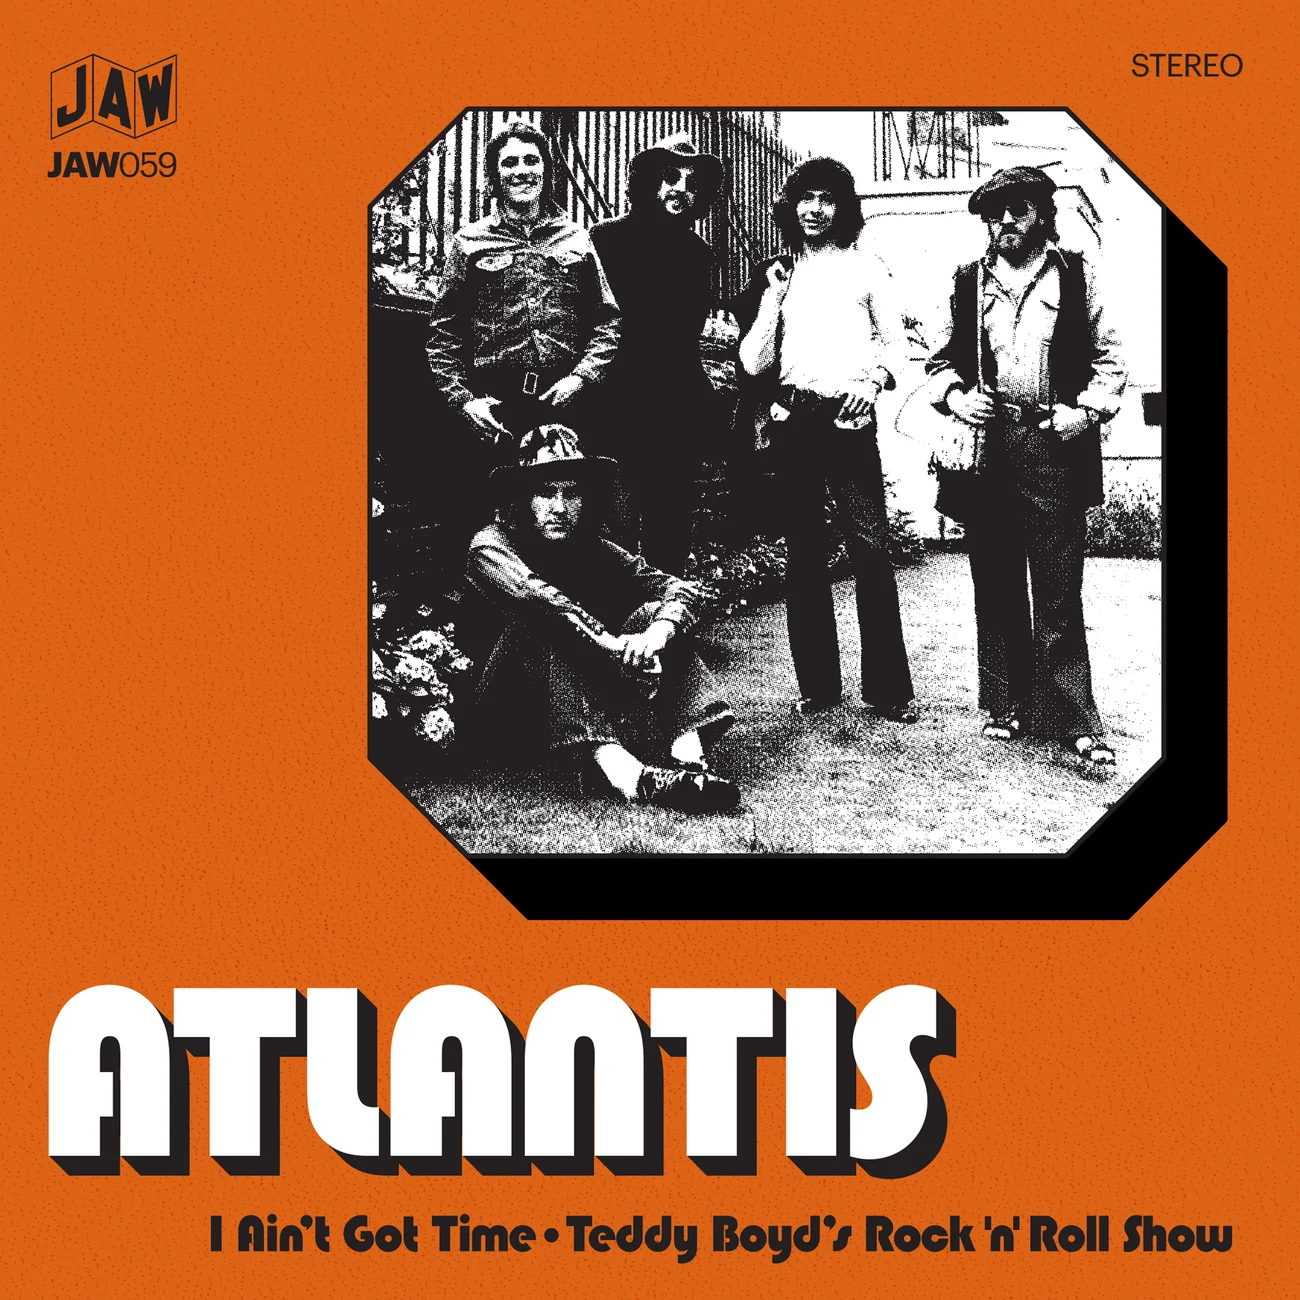 ATLANTIS "I Ain't Got Time" 7"  [Just Add Water]